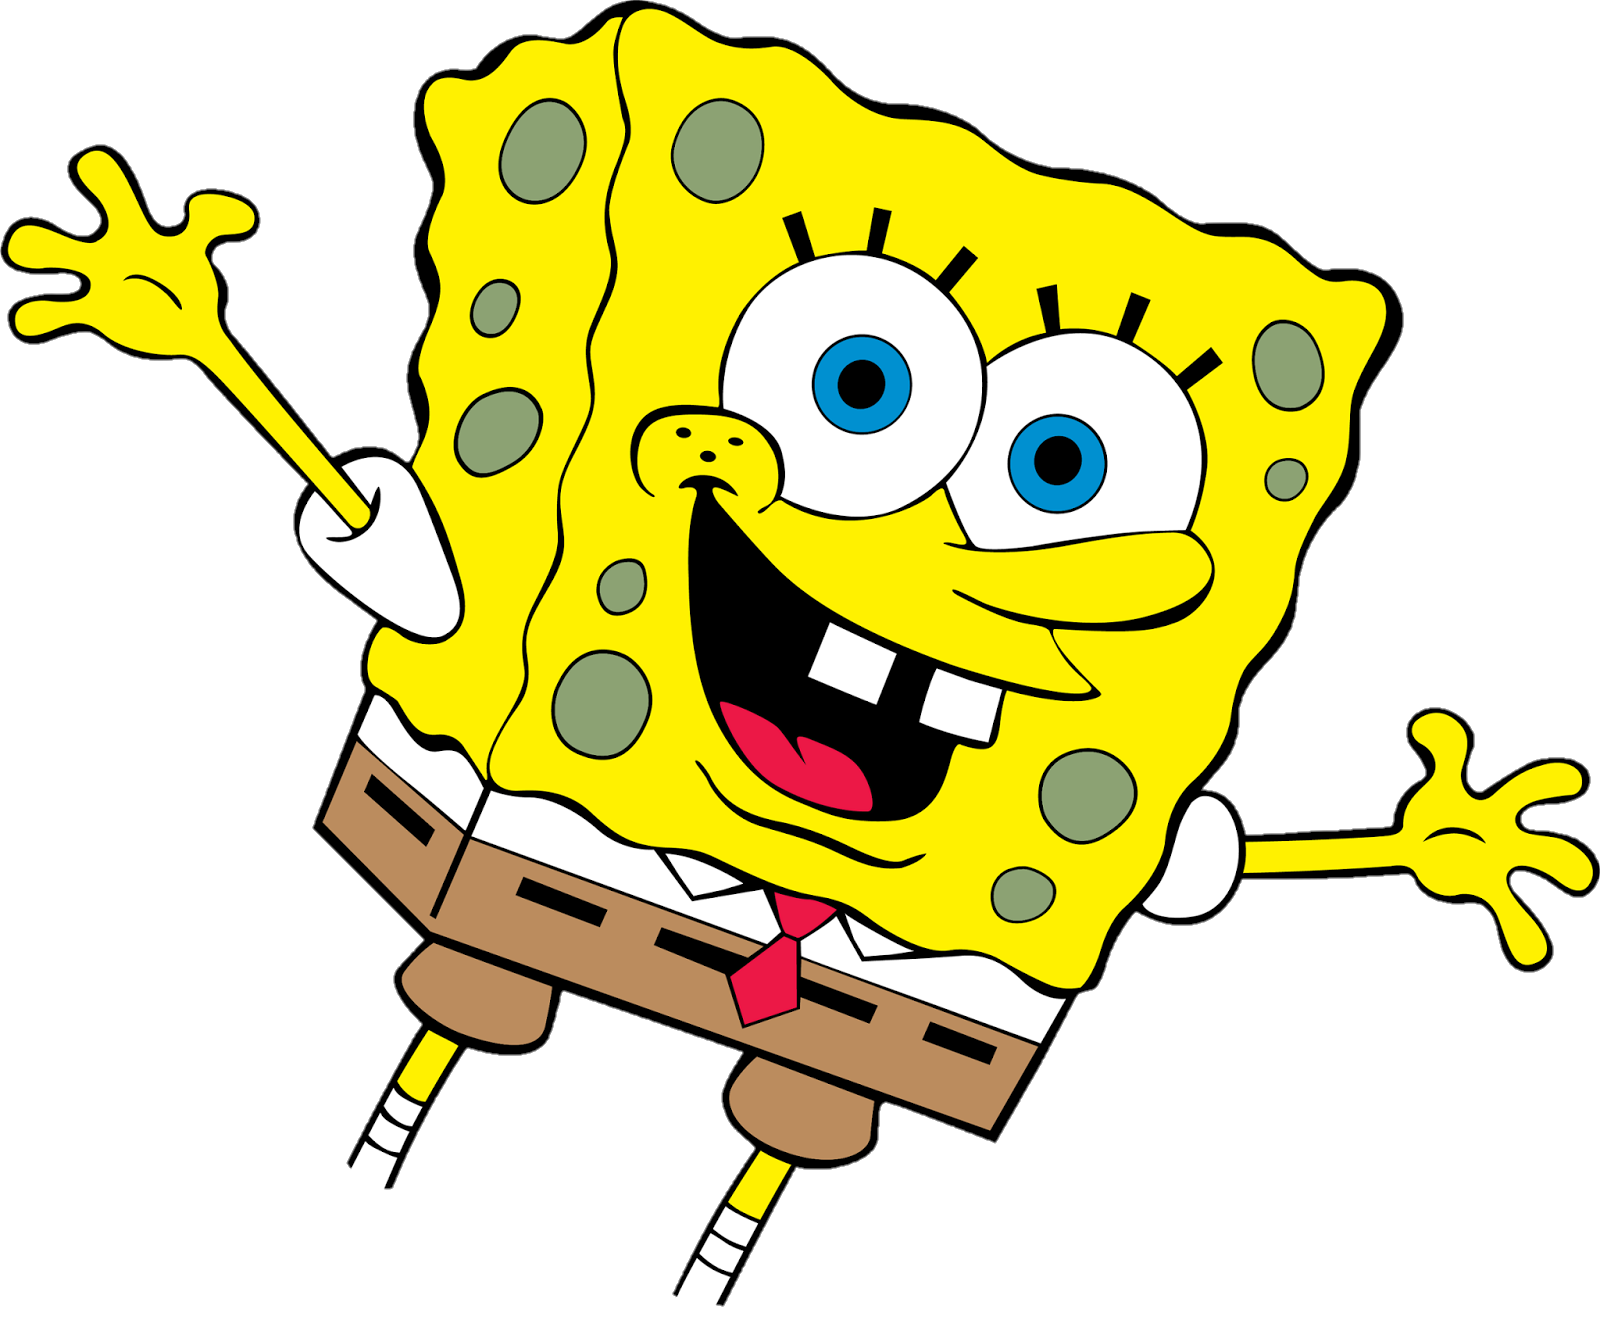 spongebob-png-image-from-pngfre-55